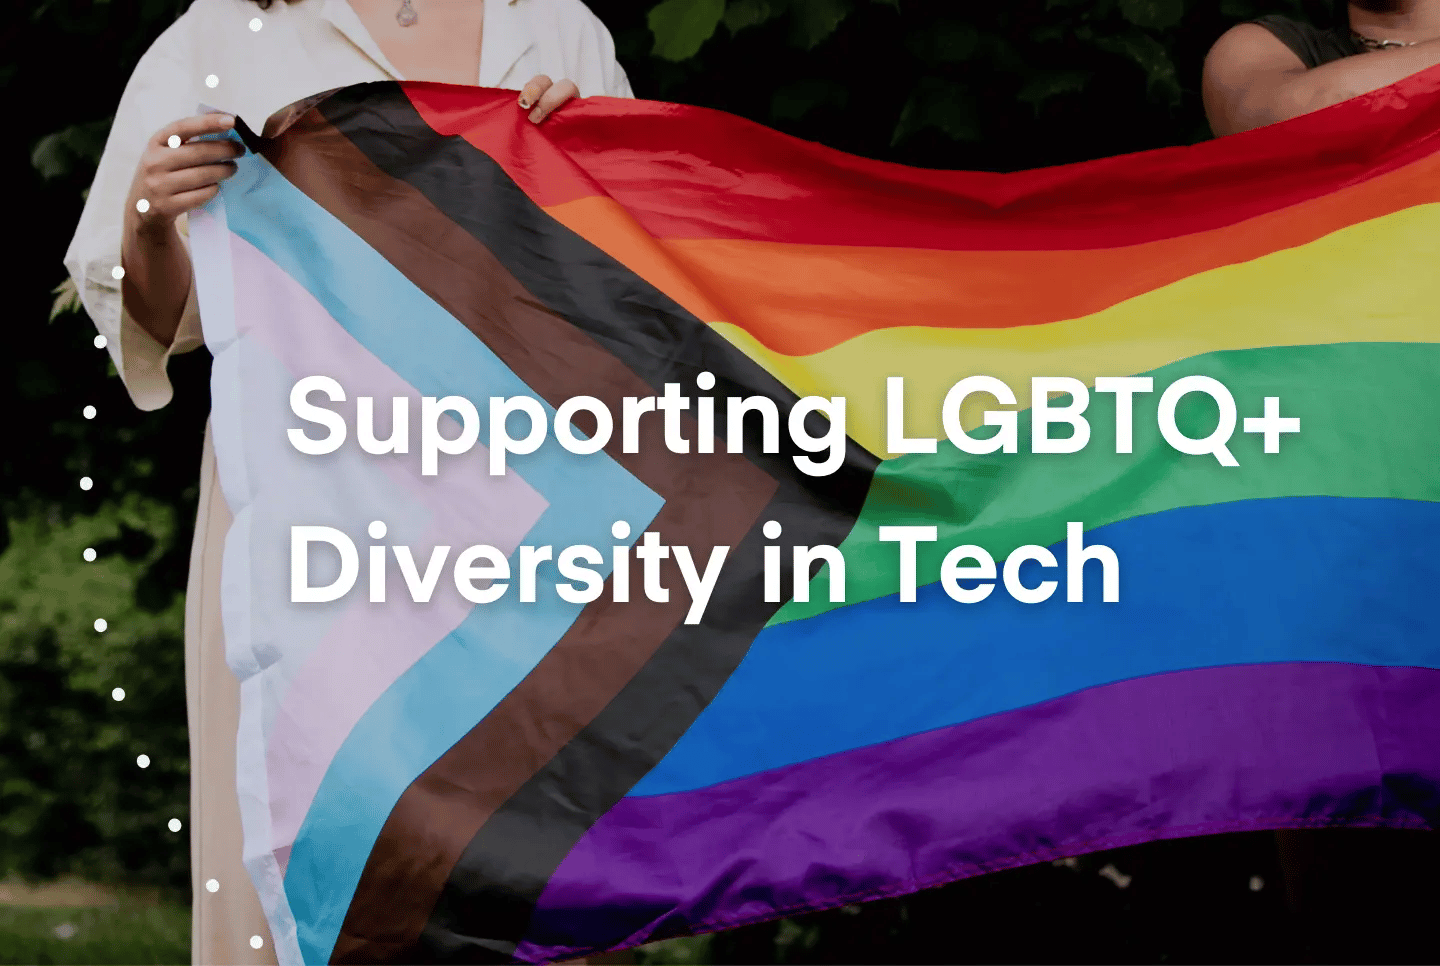 Supply chain professionals holding the pride flag with the text "Supporting LGBTQ+ Diversity in Tech"